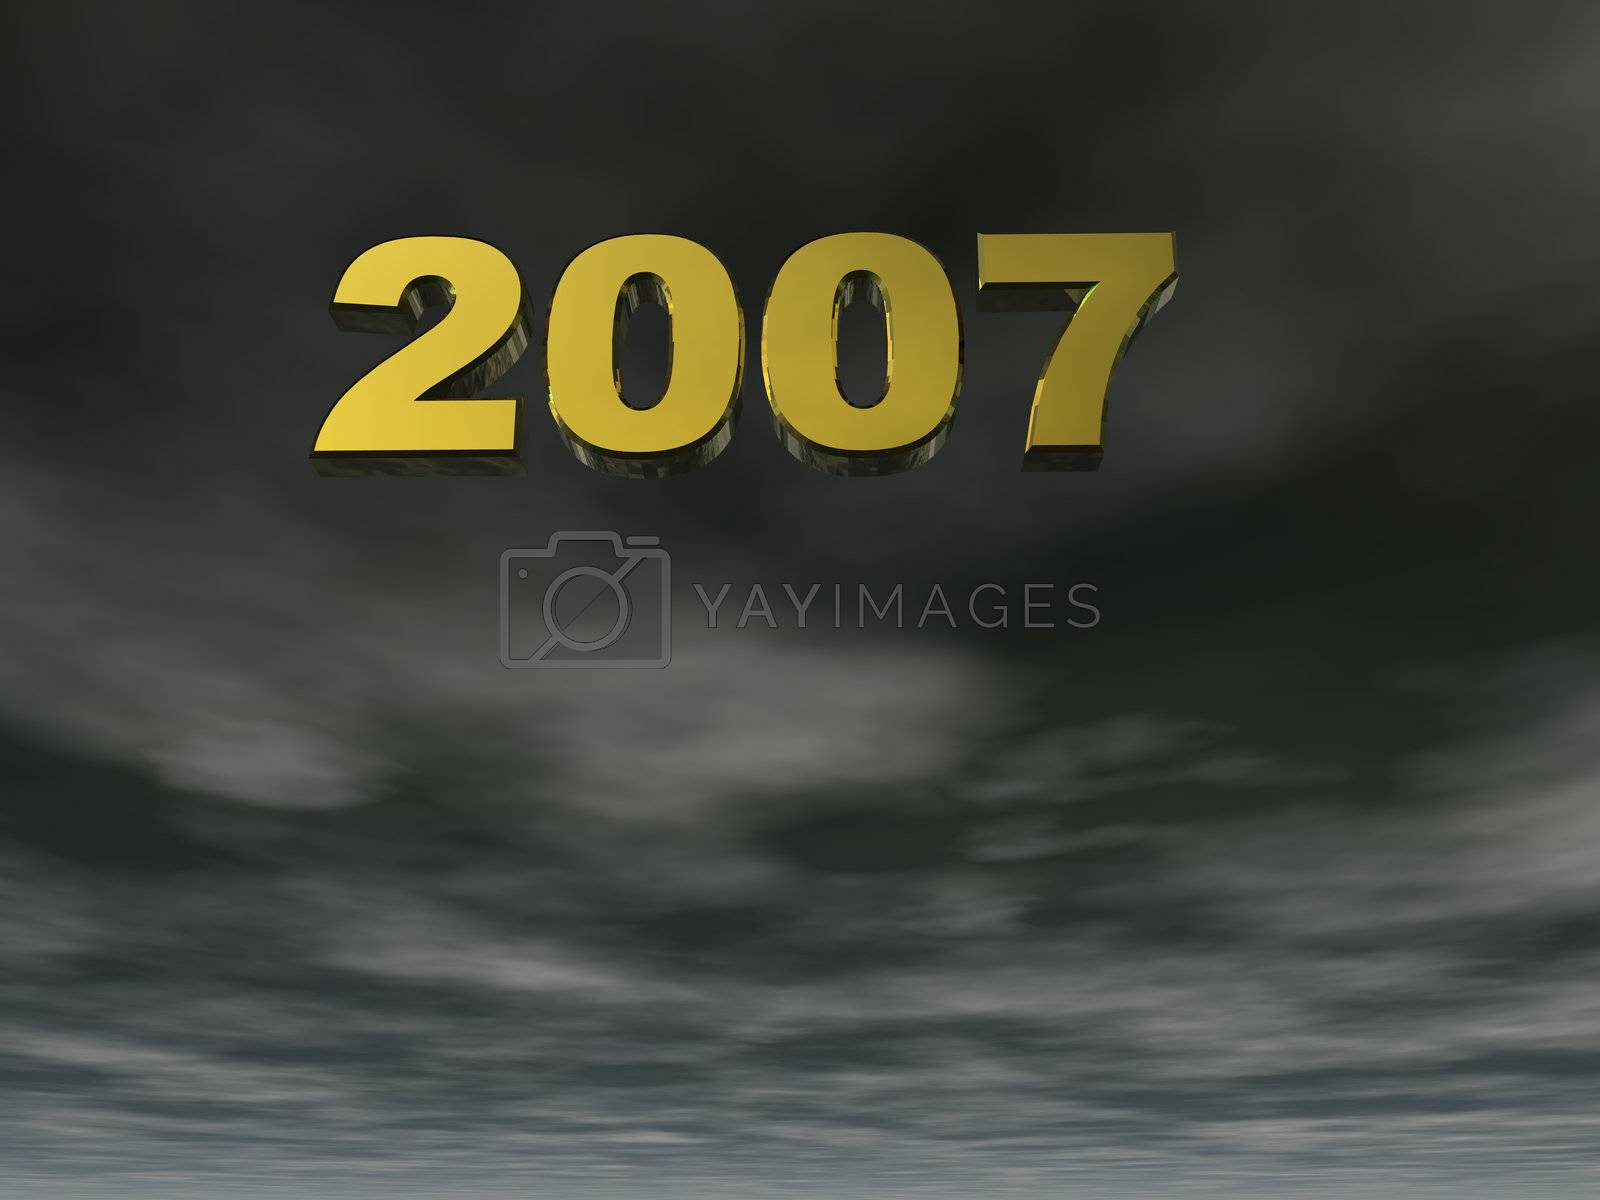 Royalty free image of 2007 by drizzd